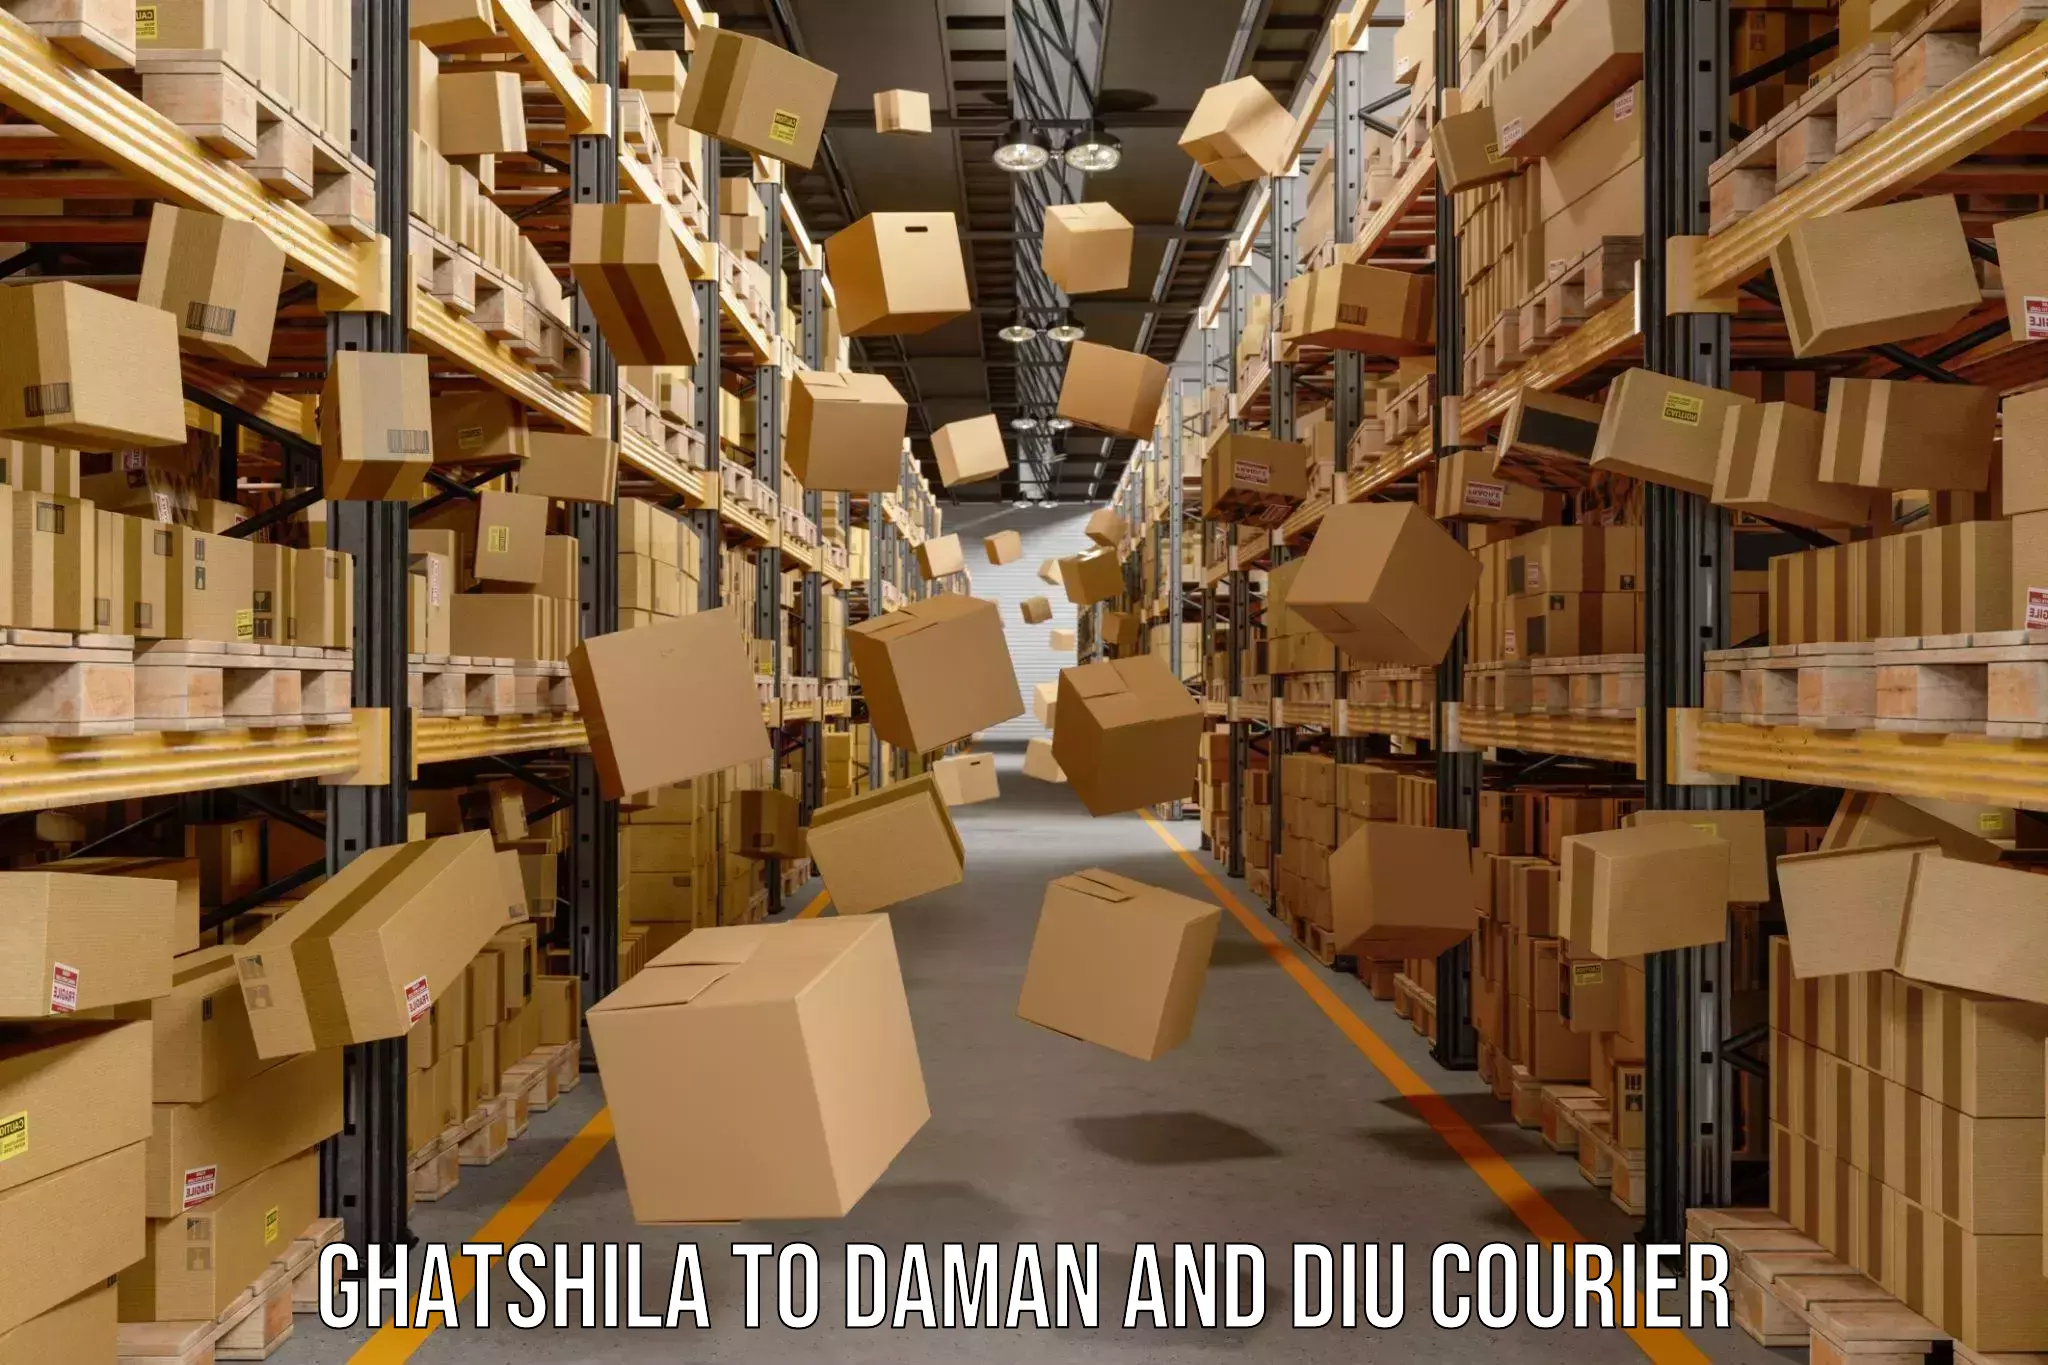 User-friendly delivery service Ghatshila to Daman and Diu